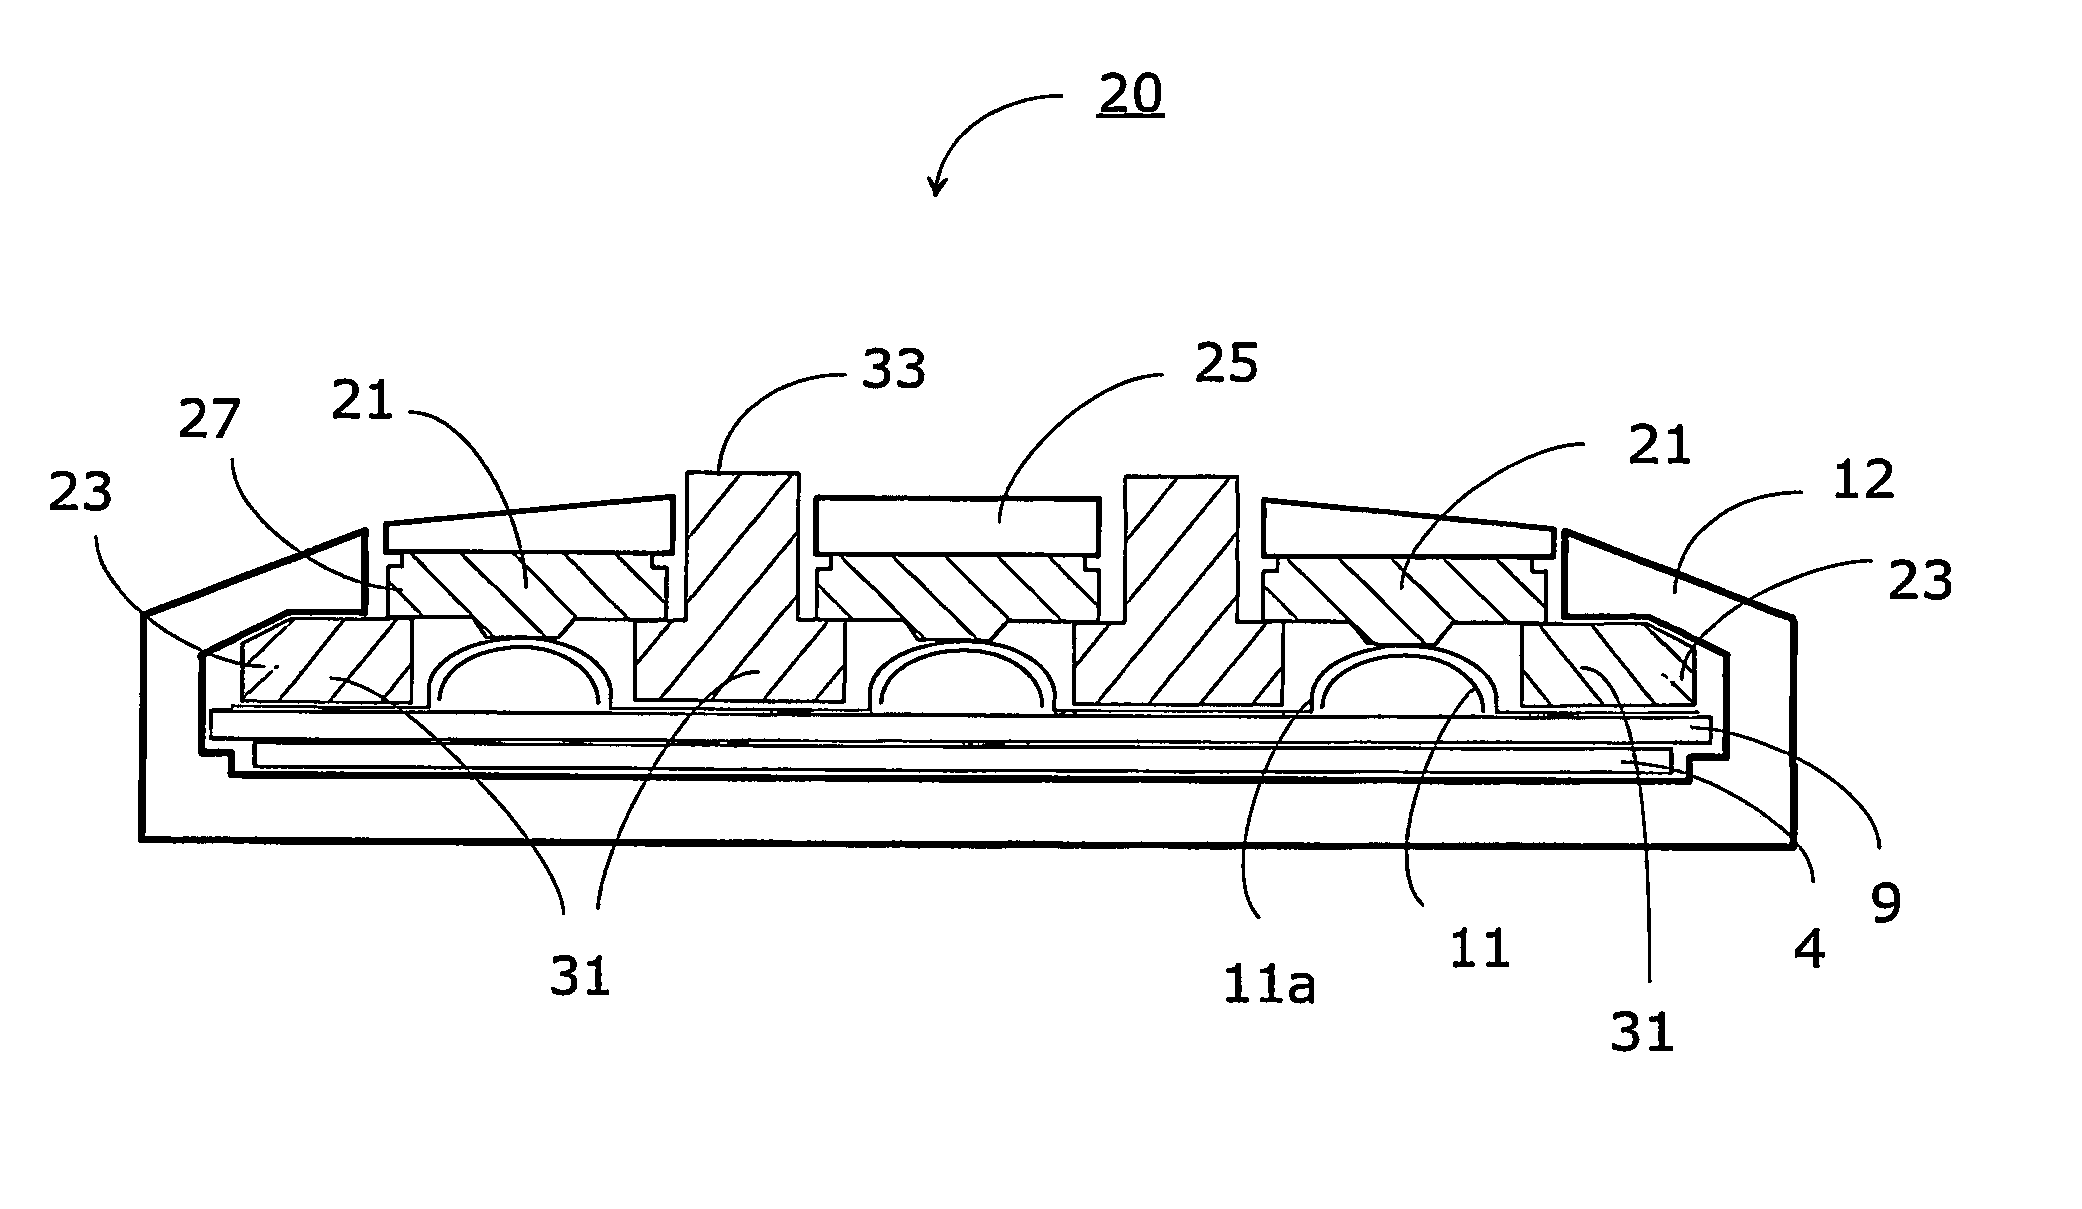 Keyboard with key supporting structure for portable electronics devices